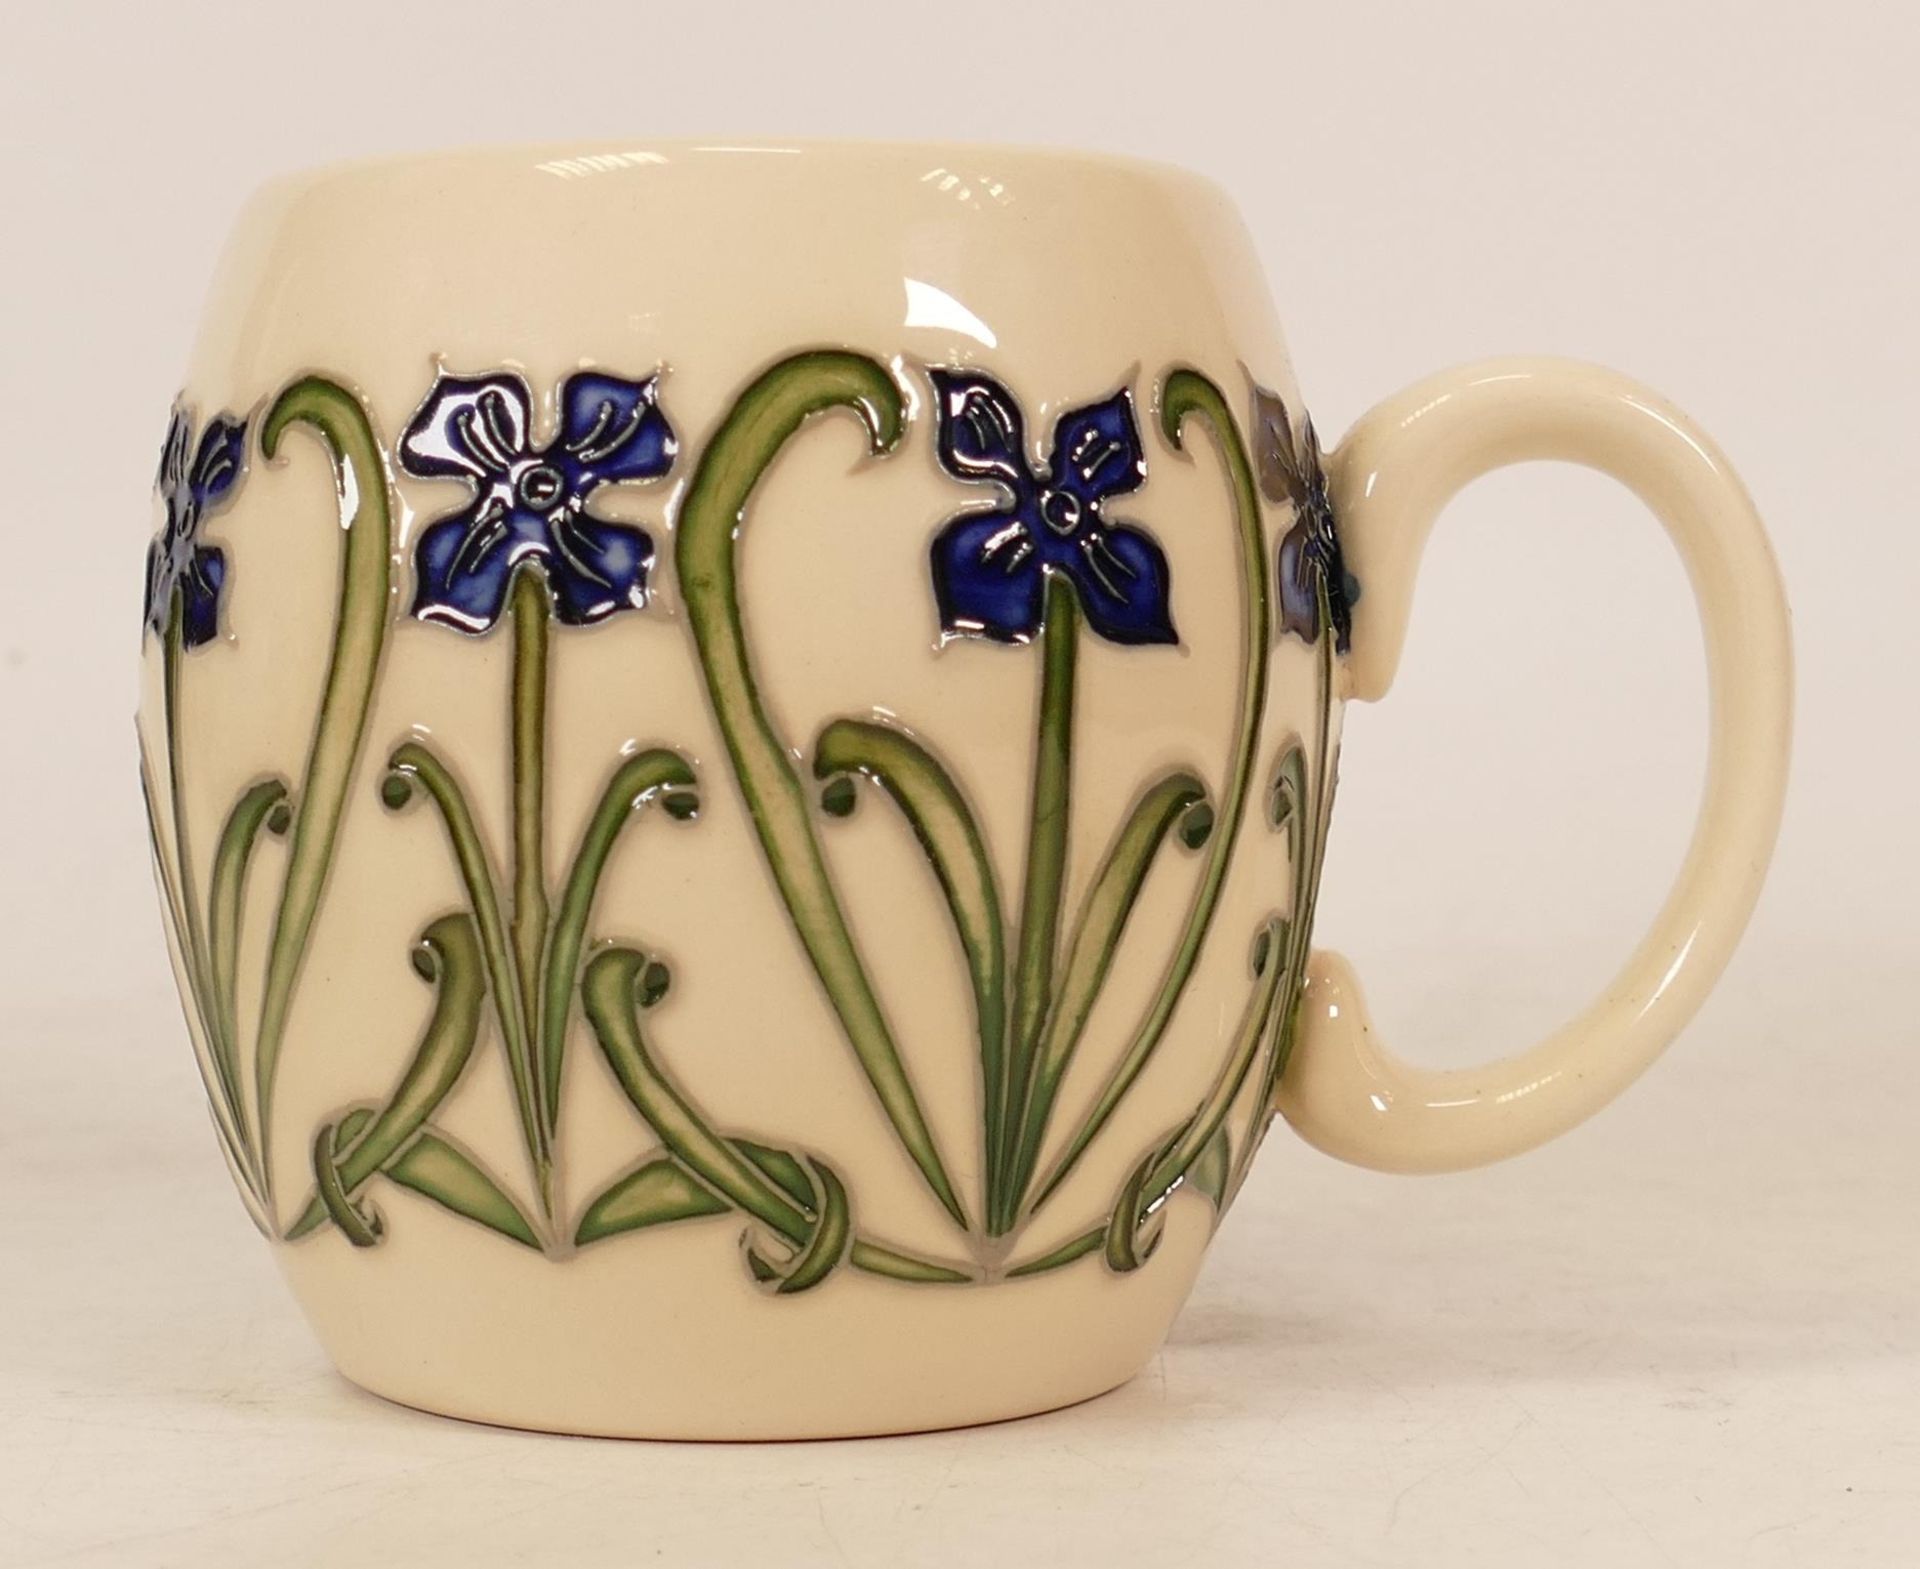 Moorcroft trial mug decorated with blue flowers dated 2/2/15